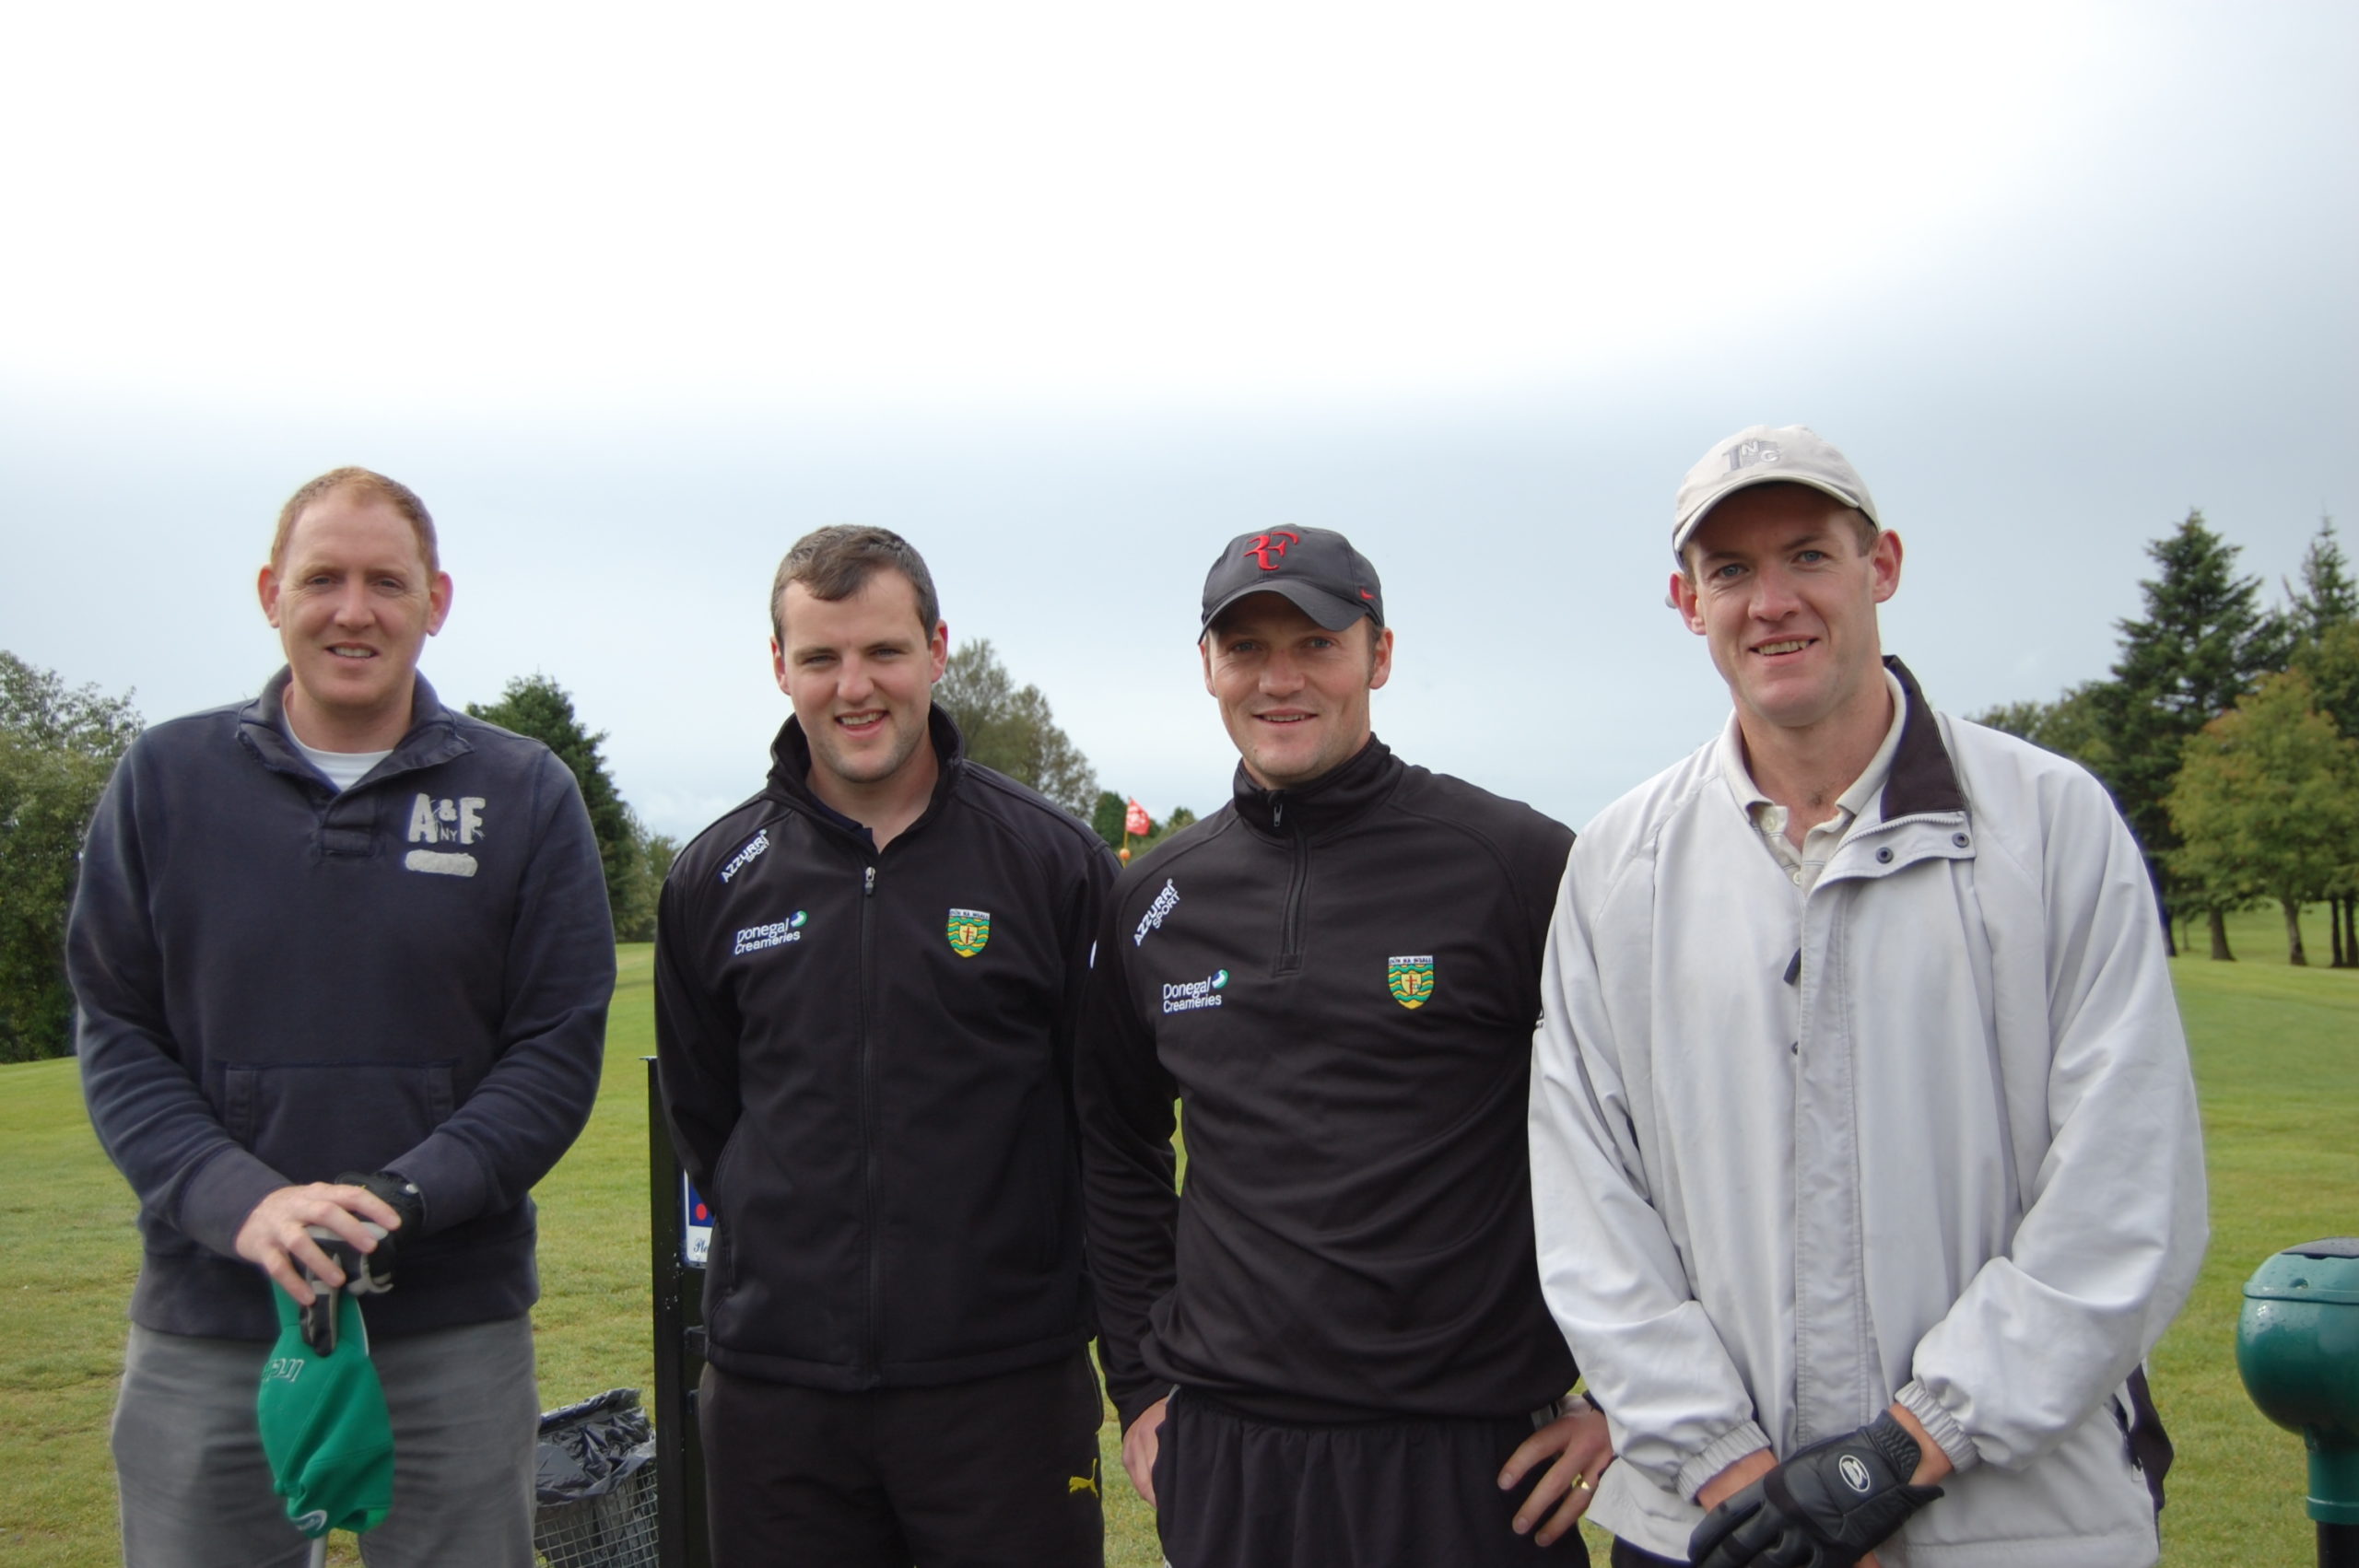 Annual Golf Day a Great Success